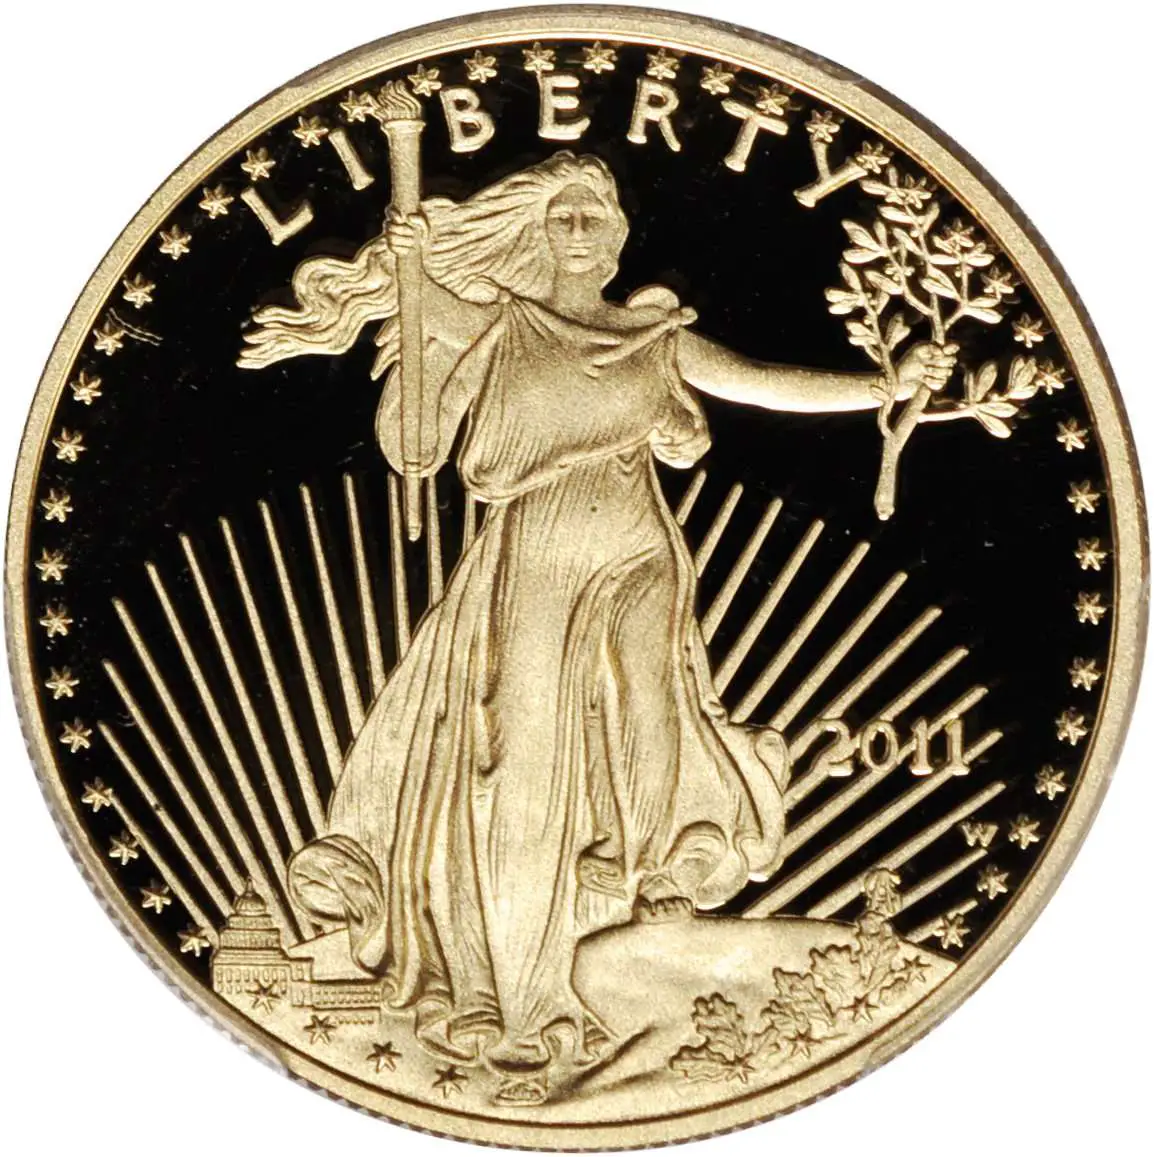 Value of 2011 $50 Gold Coin